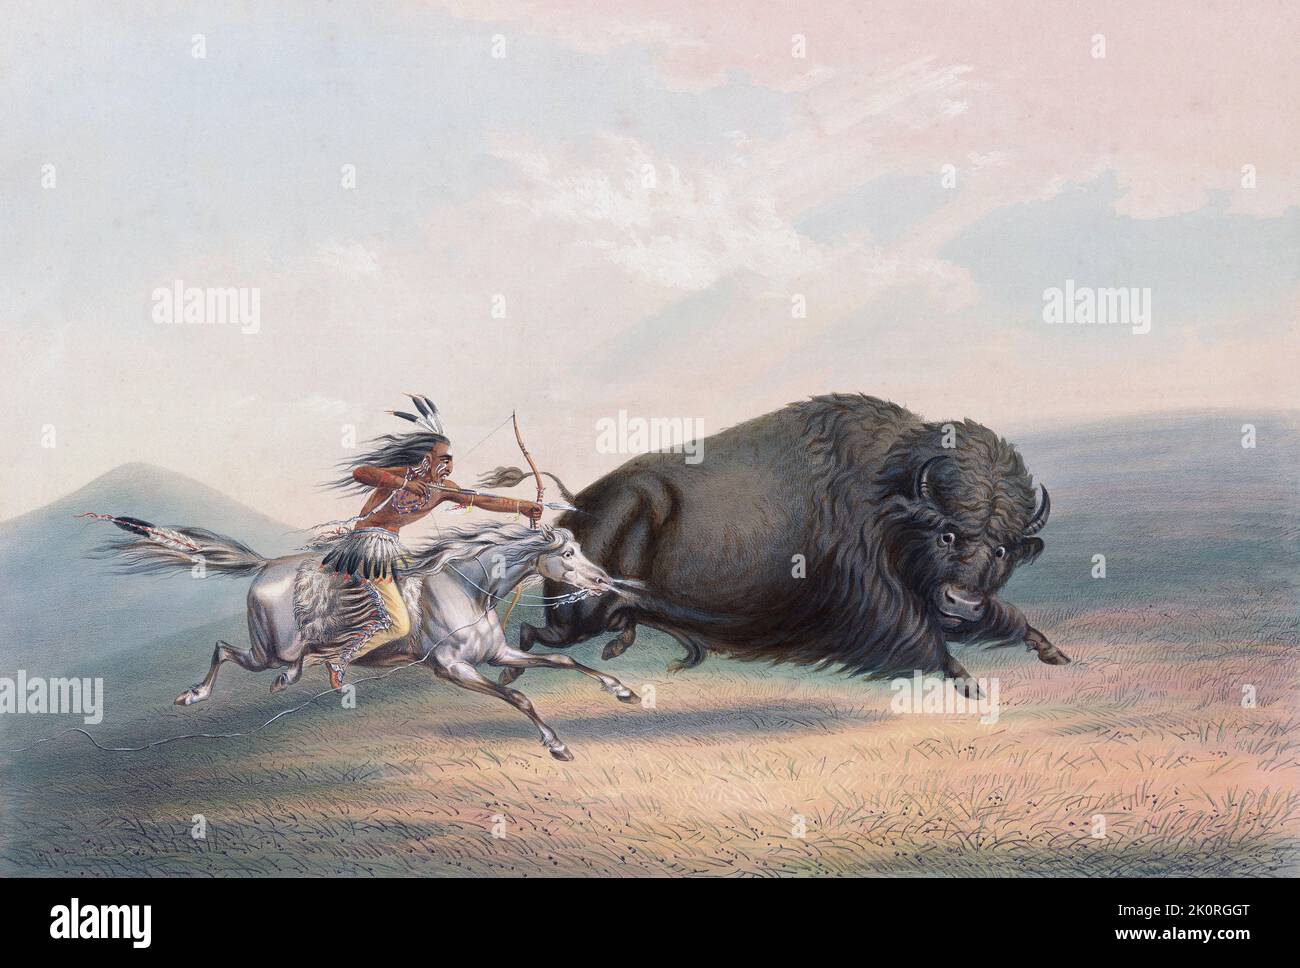 Buffalo hunt chase.  A plains Indian on horseback shoots at a buffalo with his bow and arrow. American bison (B. bison). From Catlin's North American Indian Portfolio, published in London 1844 by the artist, American adventurer George Catlin, 1796 - 1872.  During many journeys Catlin recorded with pen and brush the customs and life-styles of Native American tribes. Stock Photo